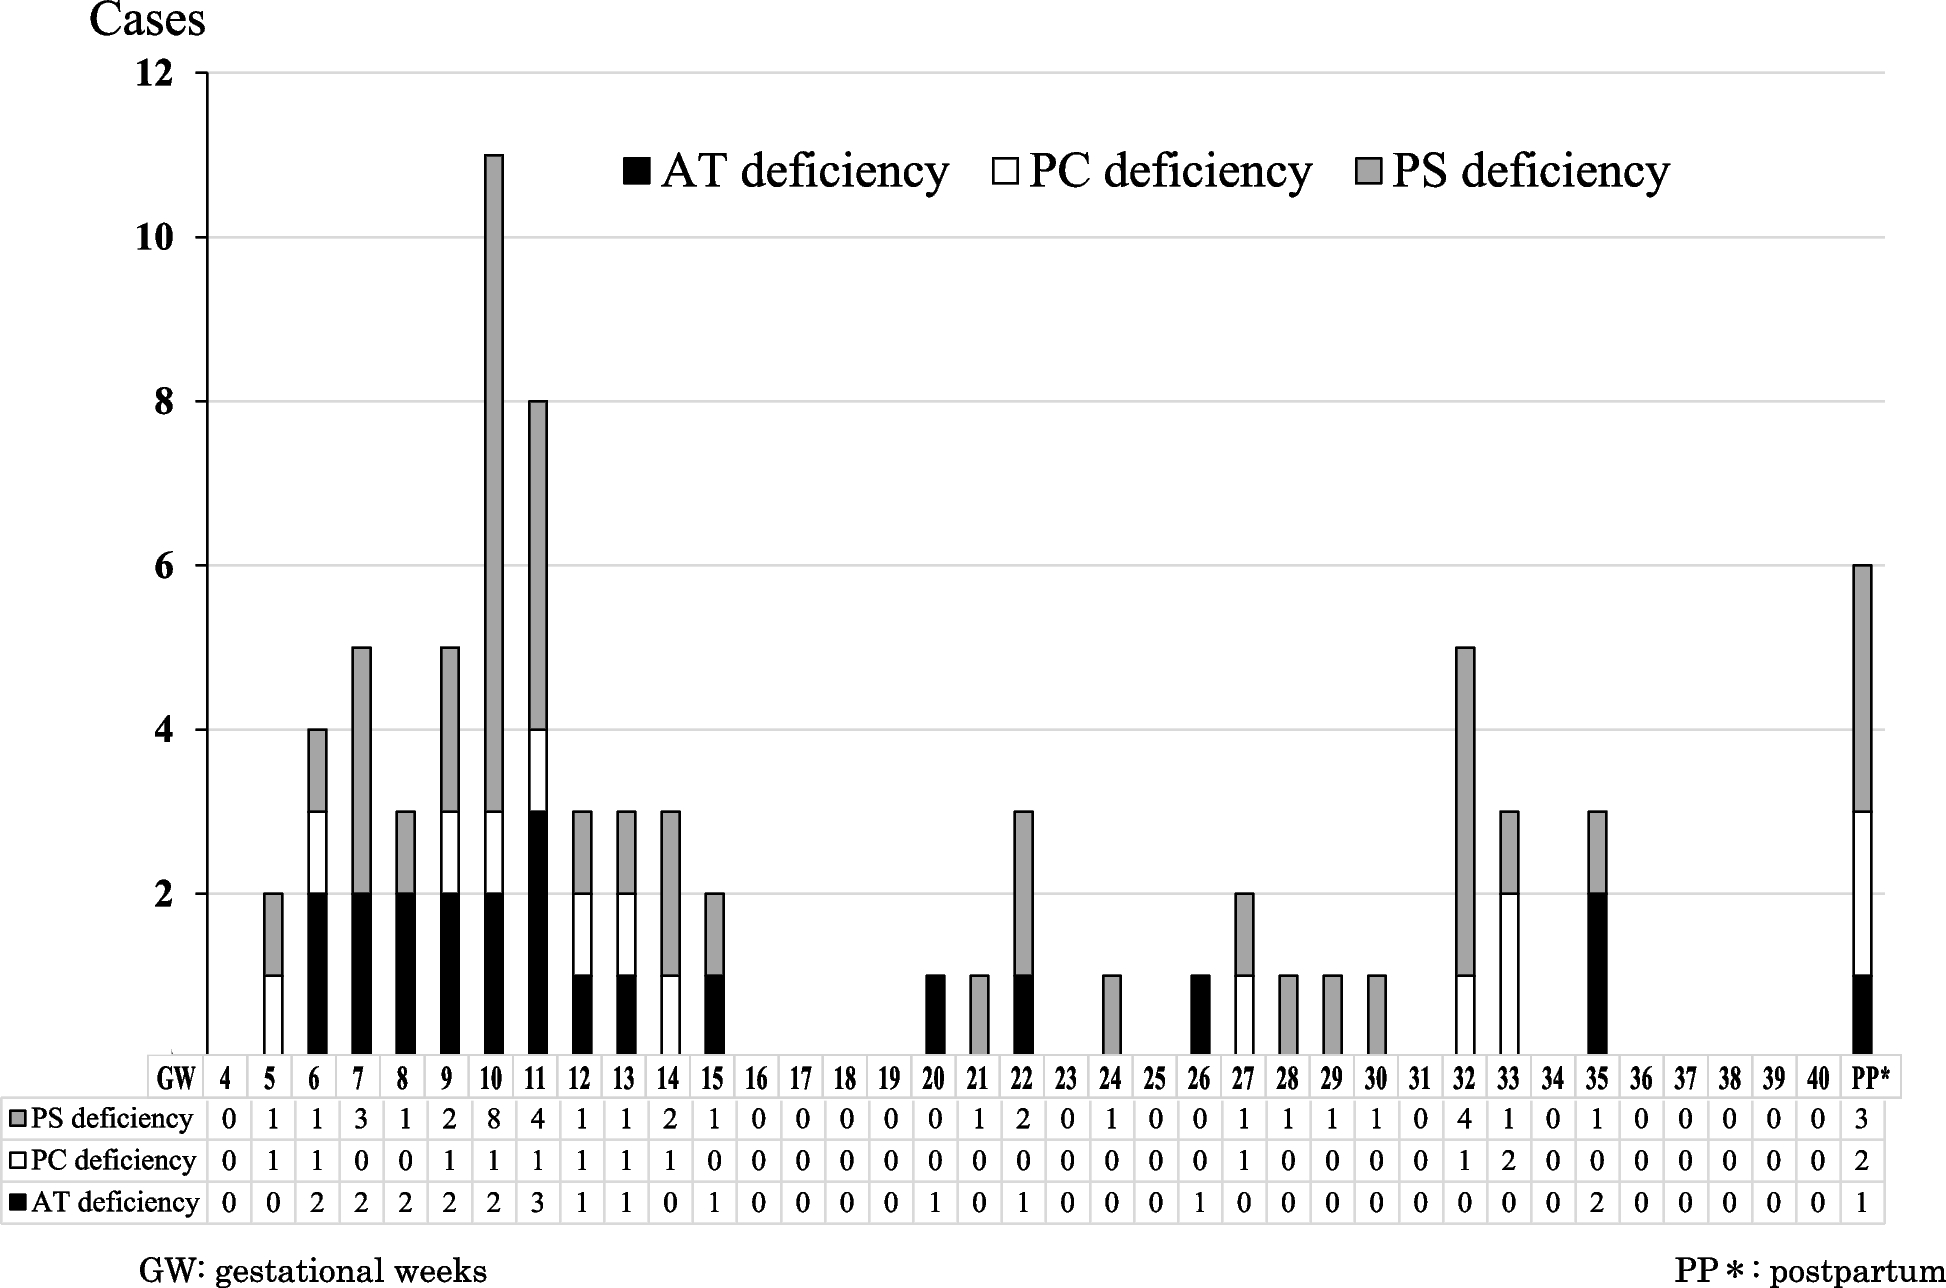 Thrombosis-related characteristics of pregnant women with antithrombin deficiency, protein C deficiency and protein S deficiency in Japan